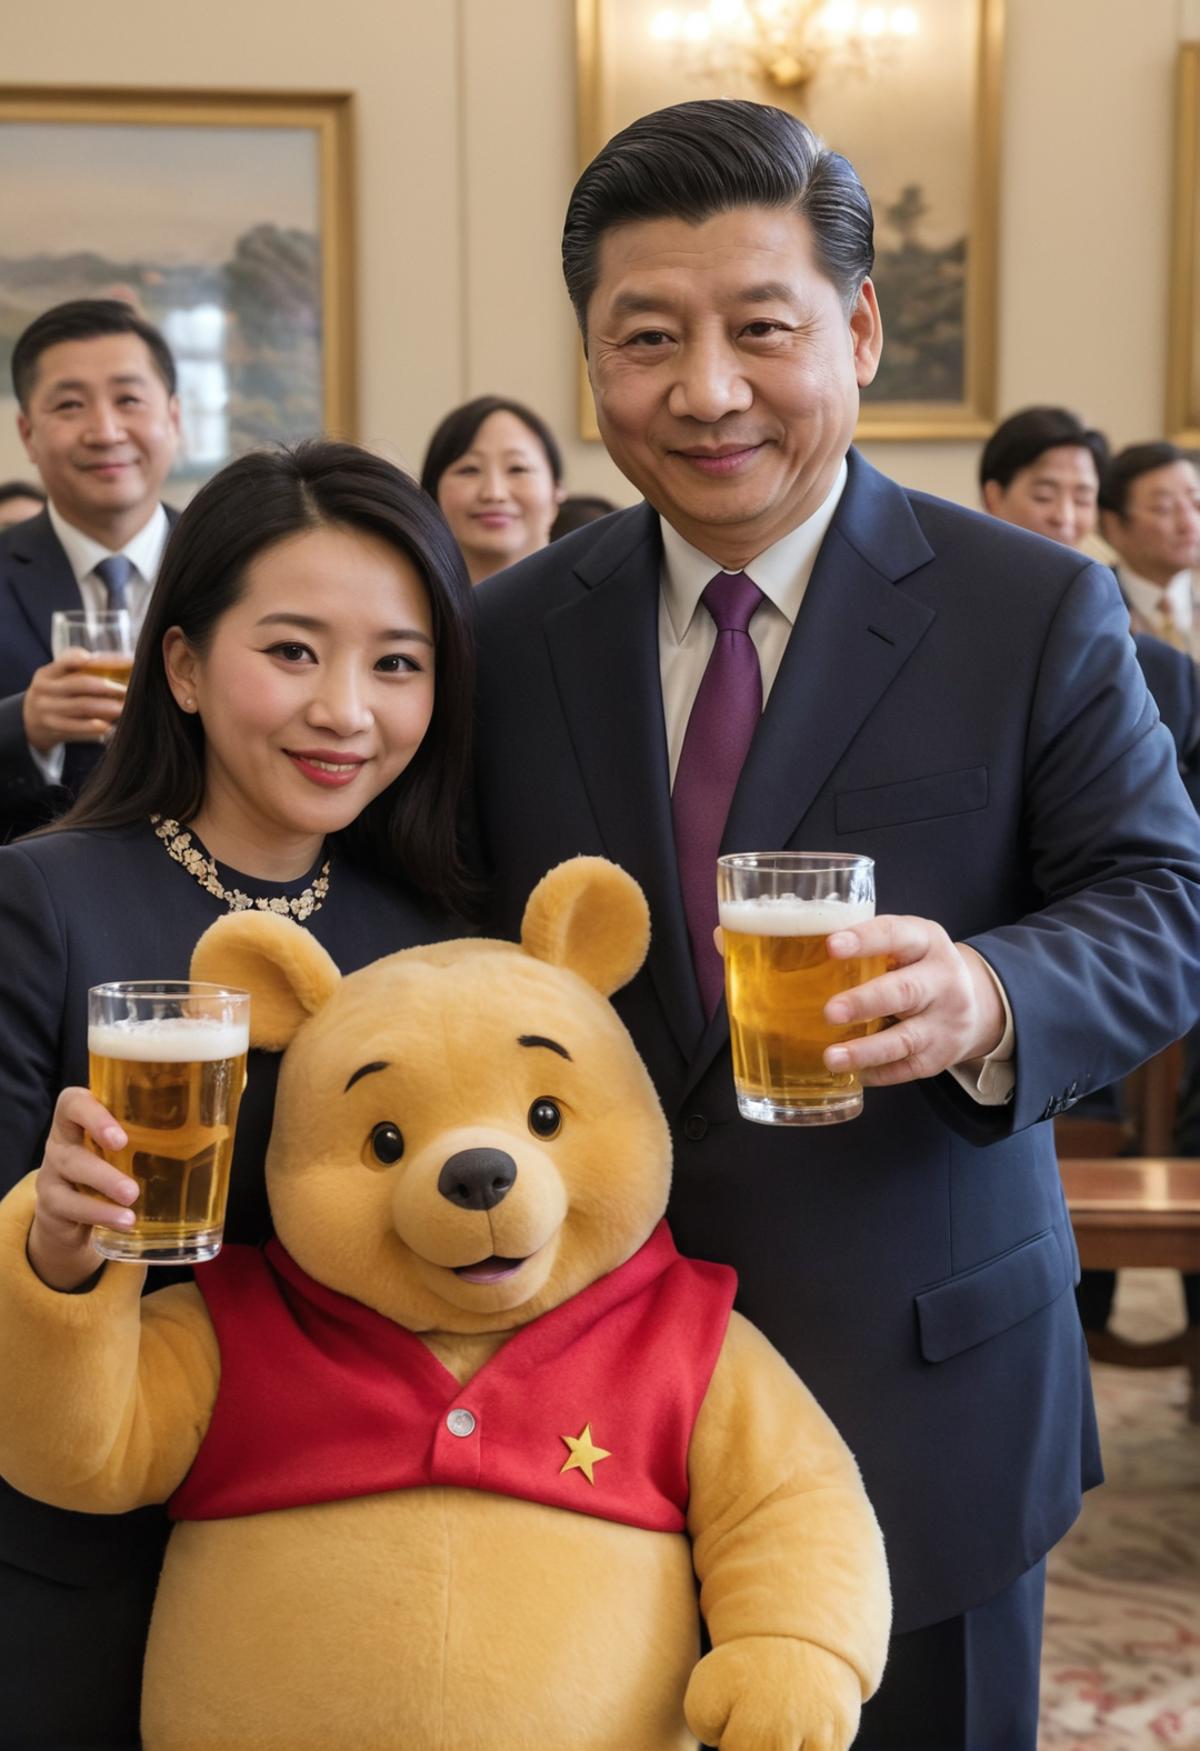 A man and a woman in suits hold glasses of beer next to a stuffed teddy bear.